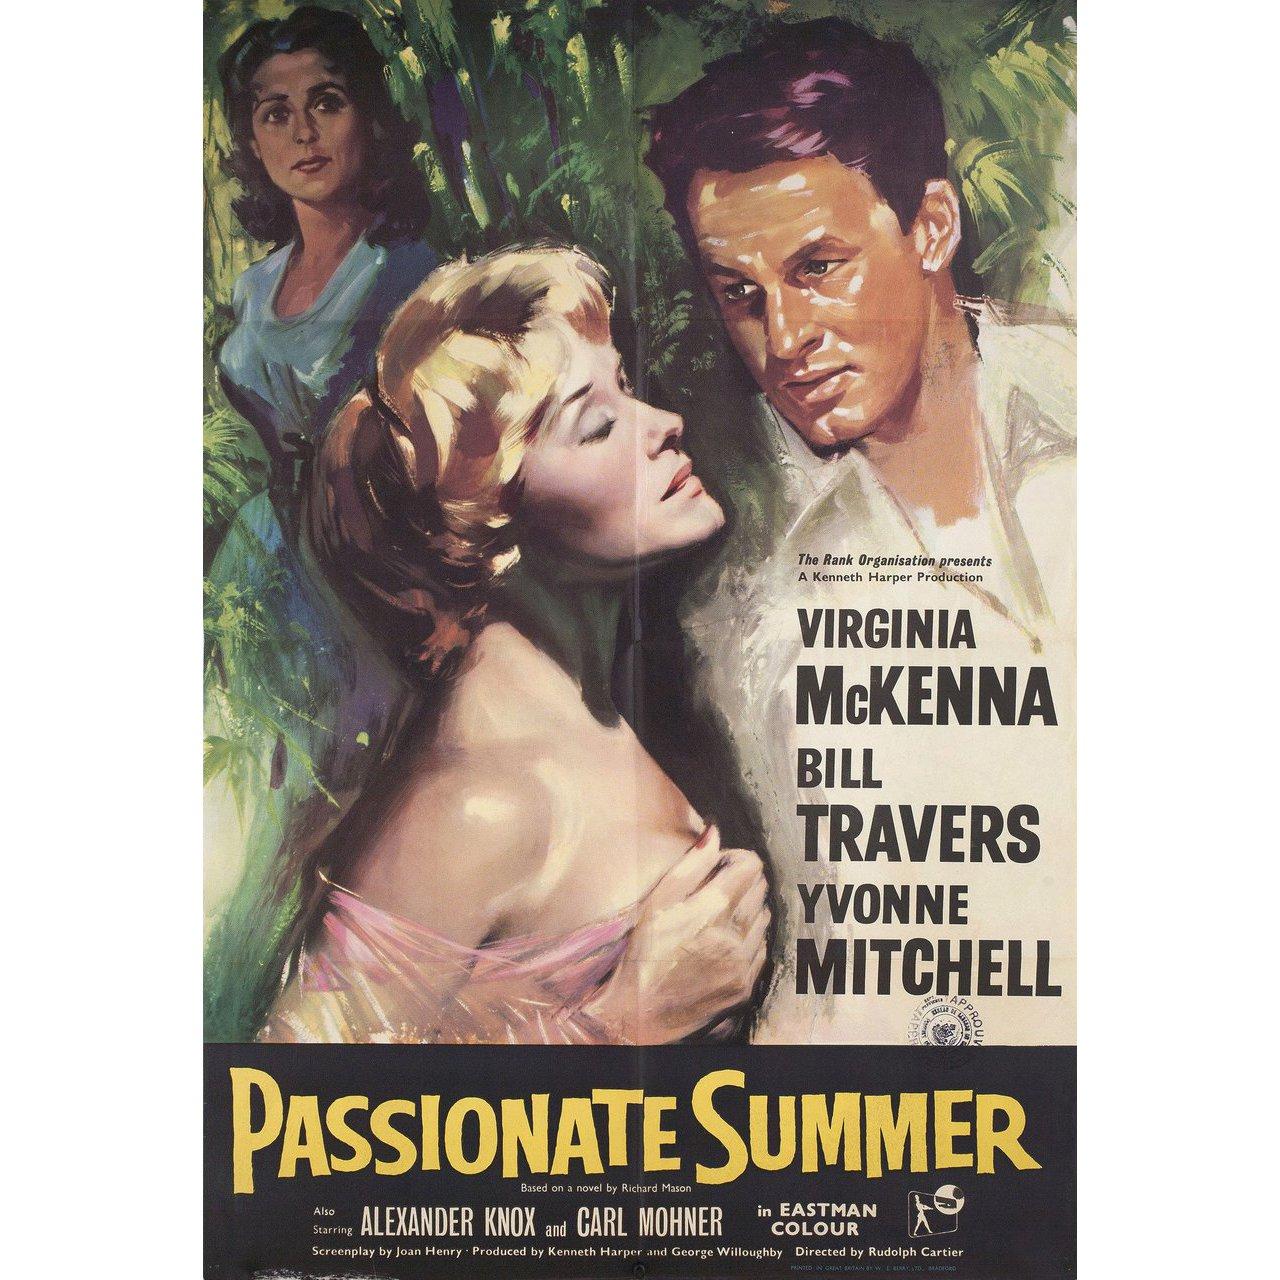 Original 1958 British one sheet poster for the film “Passionate Summer” (Storm over Jamaica) directed by Rudolph Cartier with Virginia McKenna / Bill Travers / Yvonne Mitchell / Alexander Knox. Very good condition, folded with censor stamp. Many